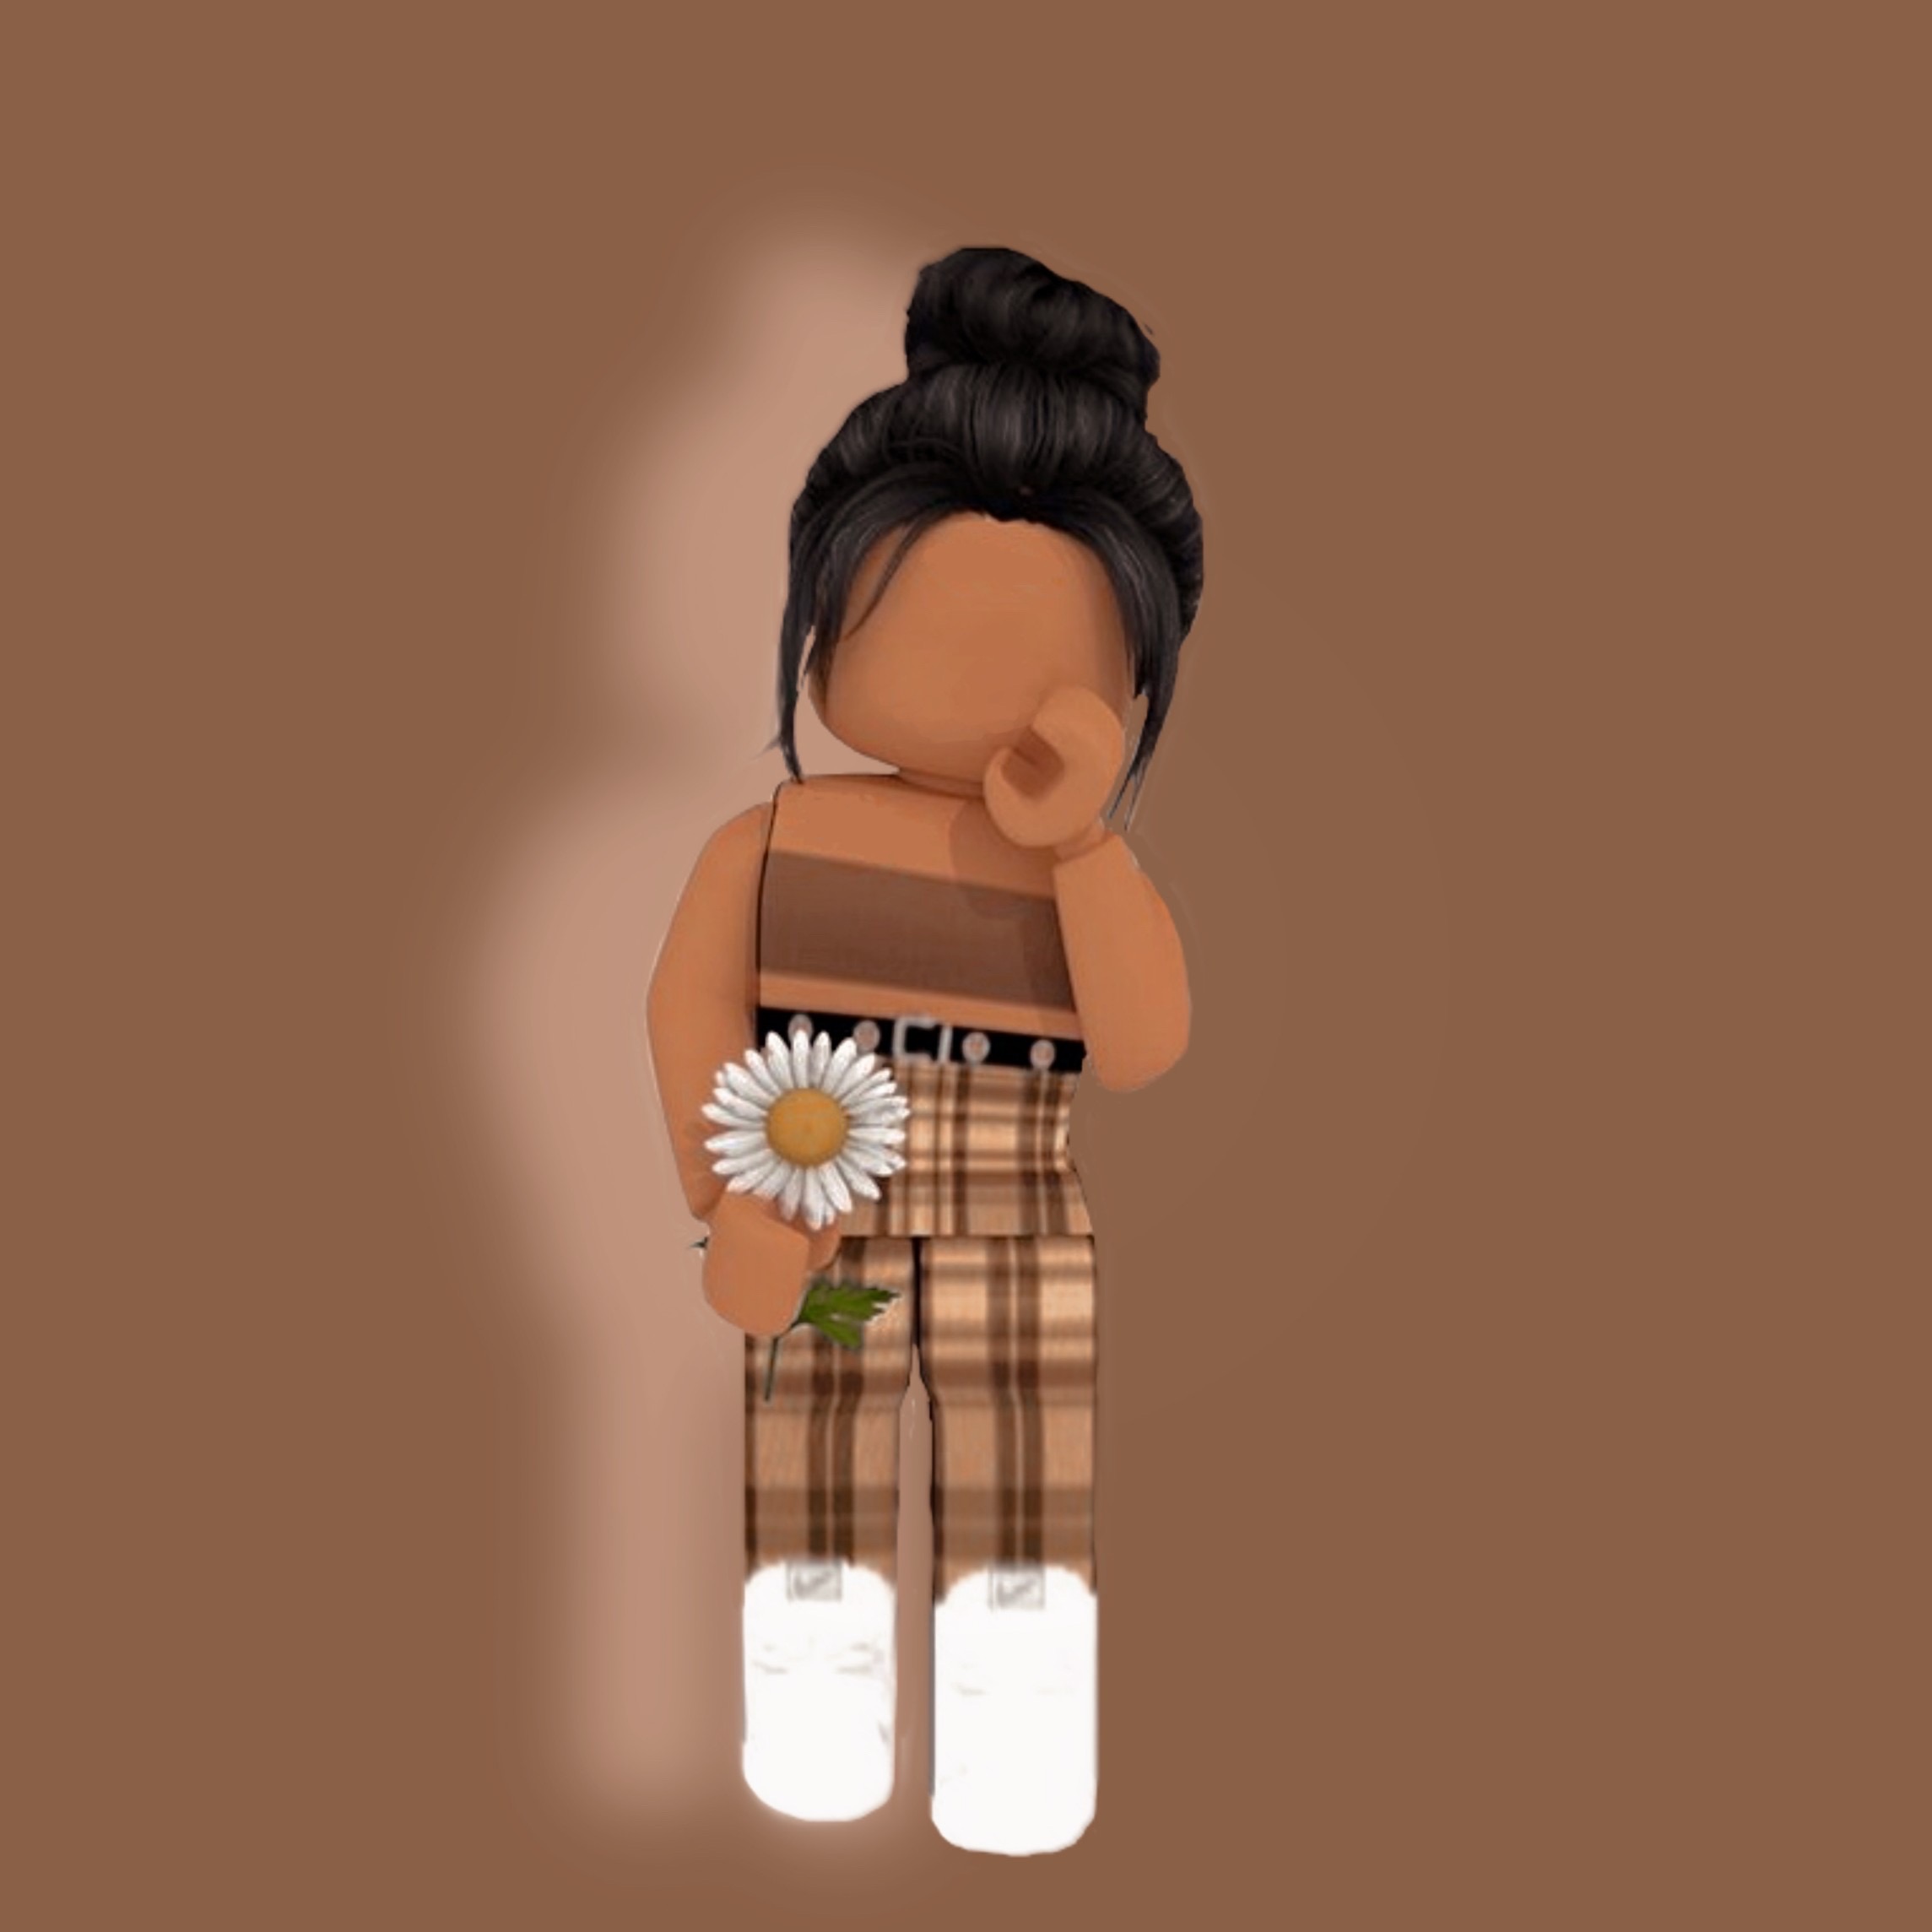 Roblox Aesthetic Cute Awe Image By 𝕃𝕠𝕧𝕝𝕖𝕪 - people cool roblox wallpapers